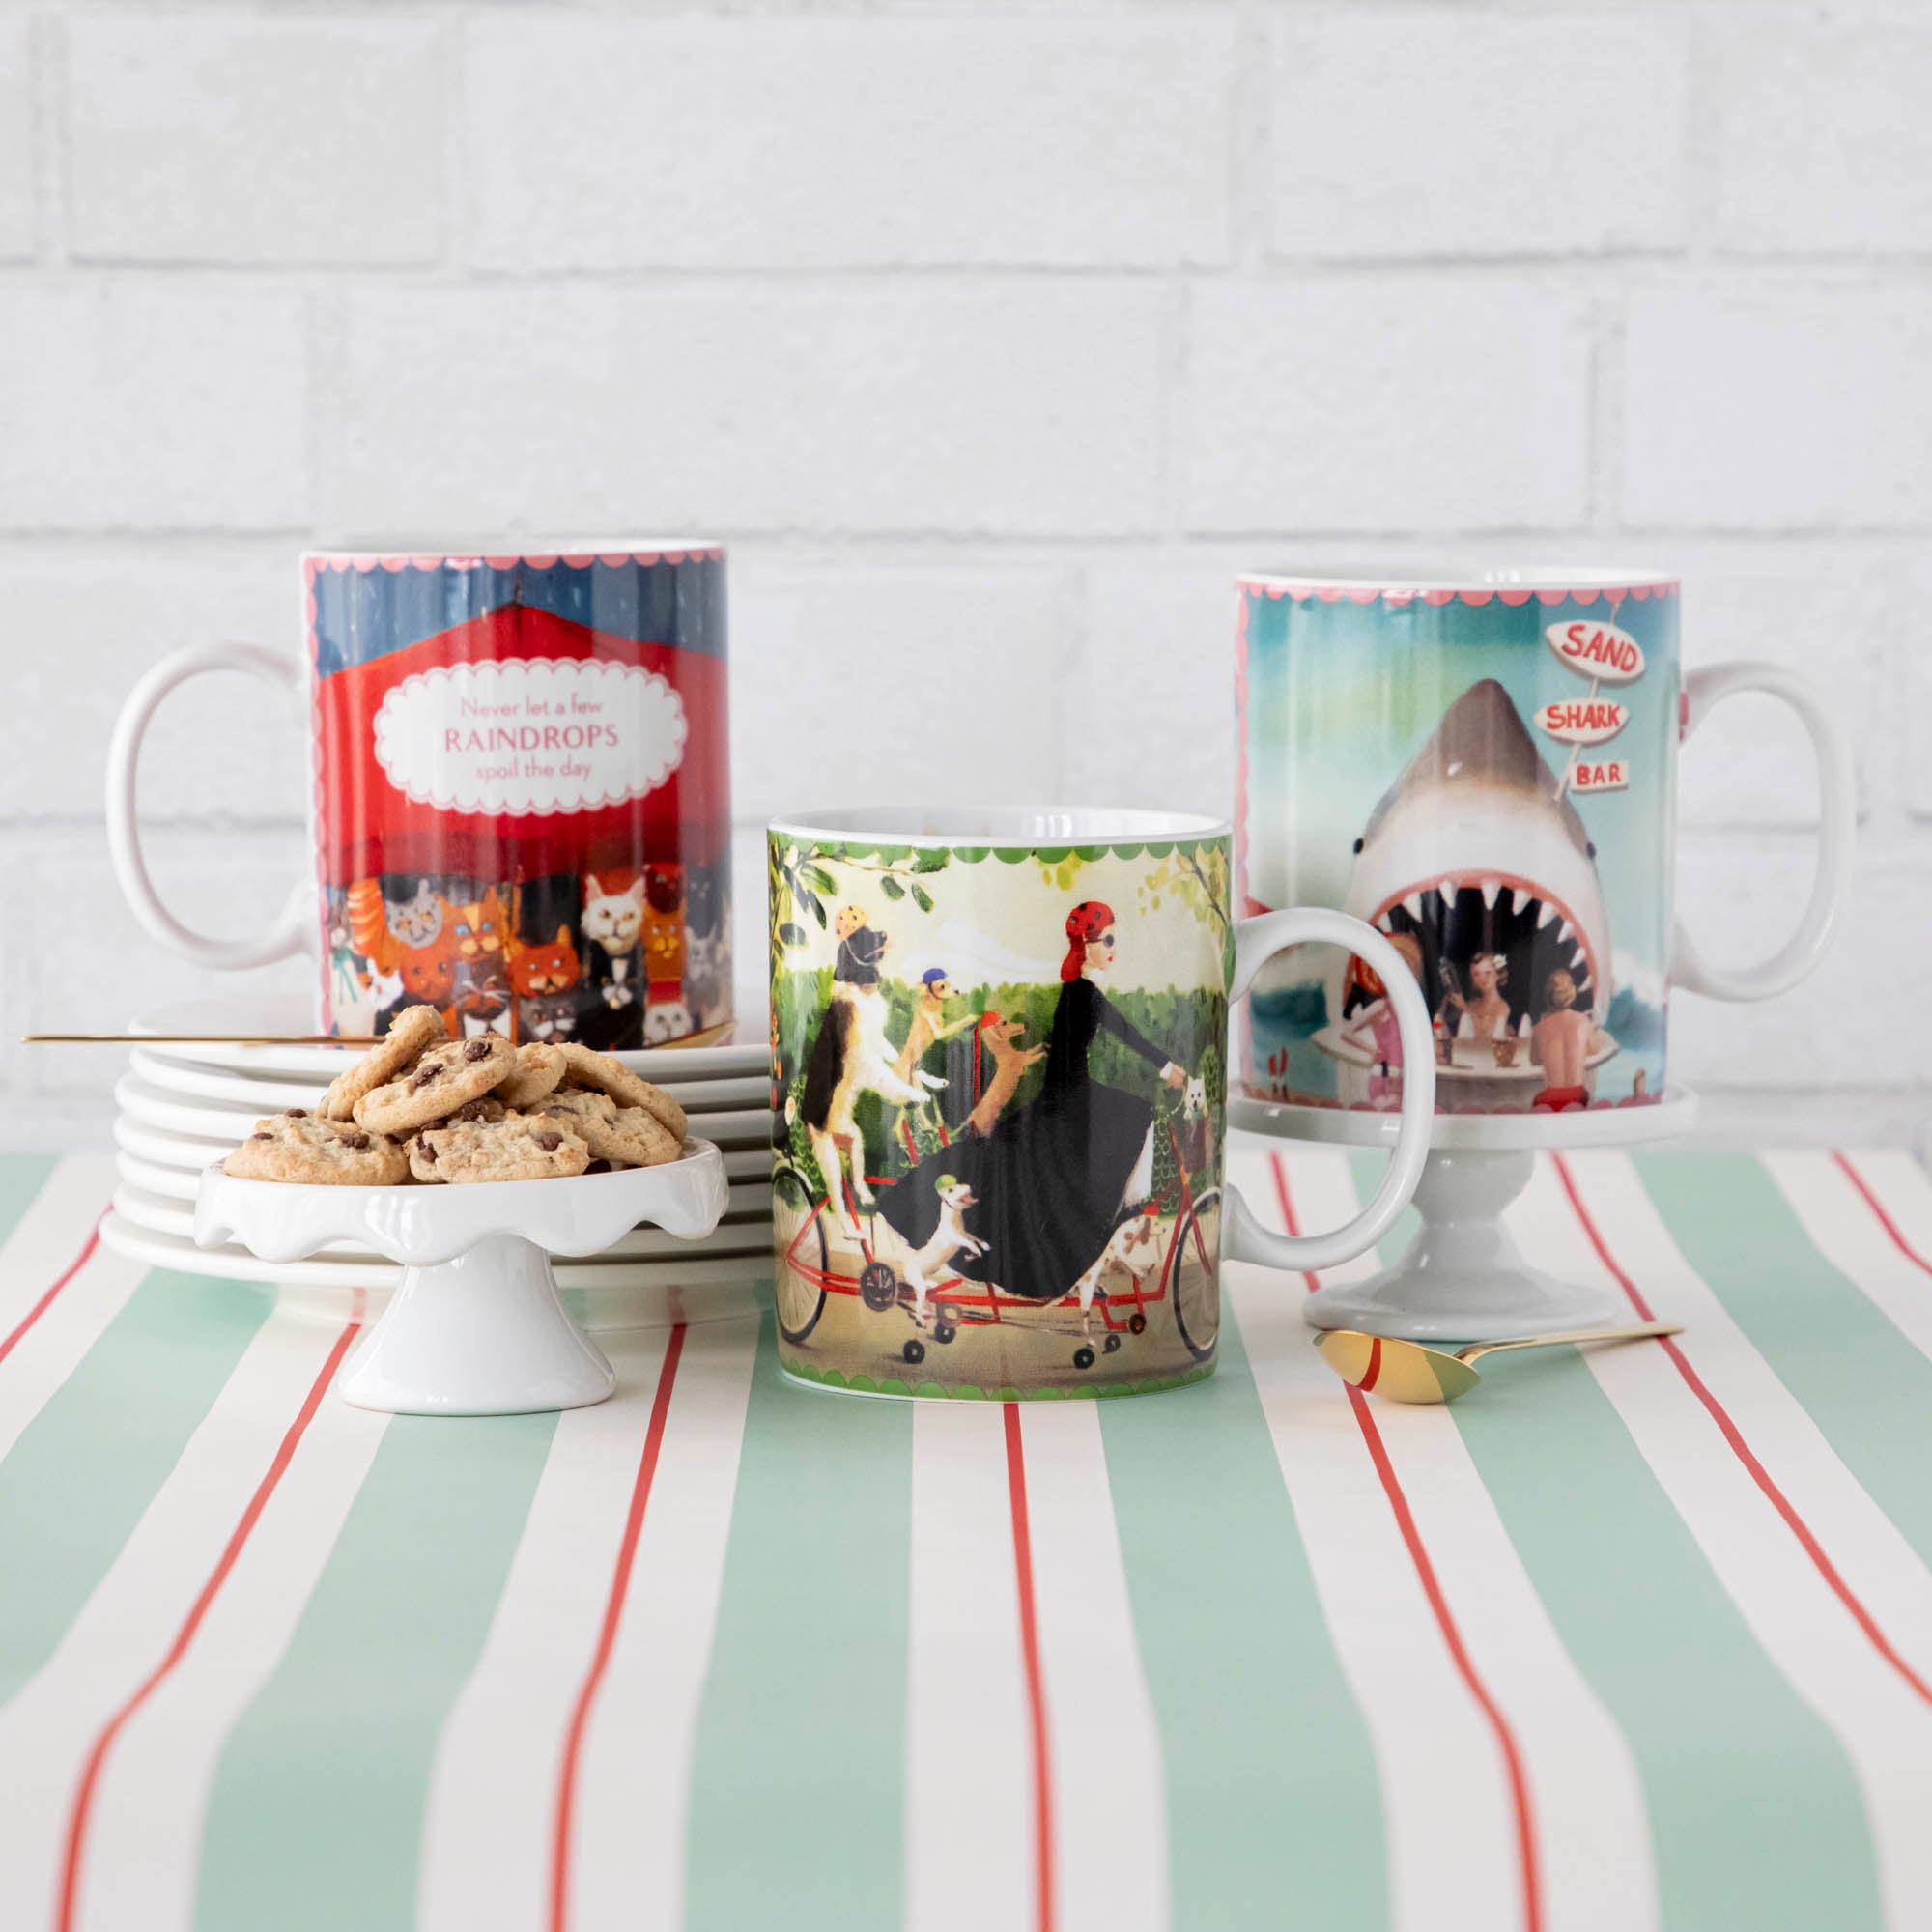 Three New York Puzzle Company Shark Bar Mugs on a table with cookies and crackers.